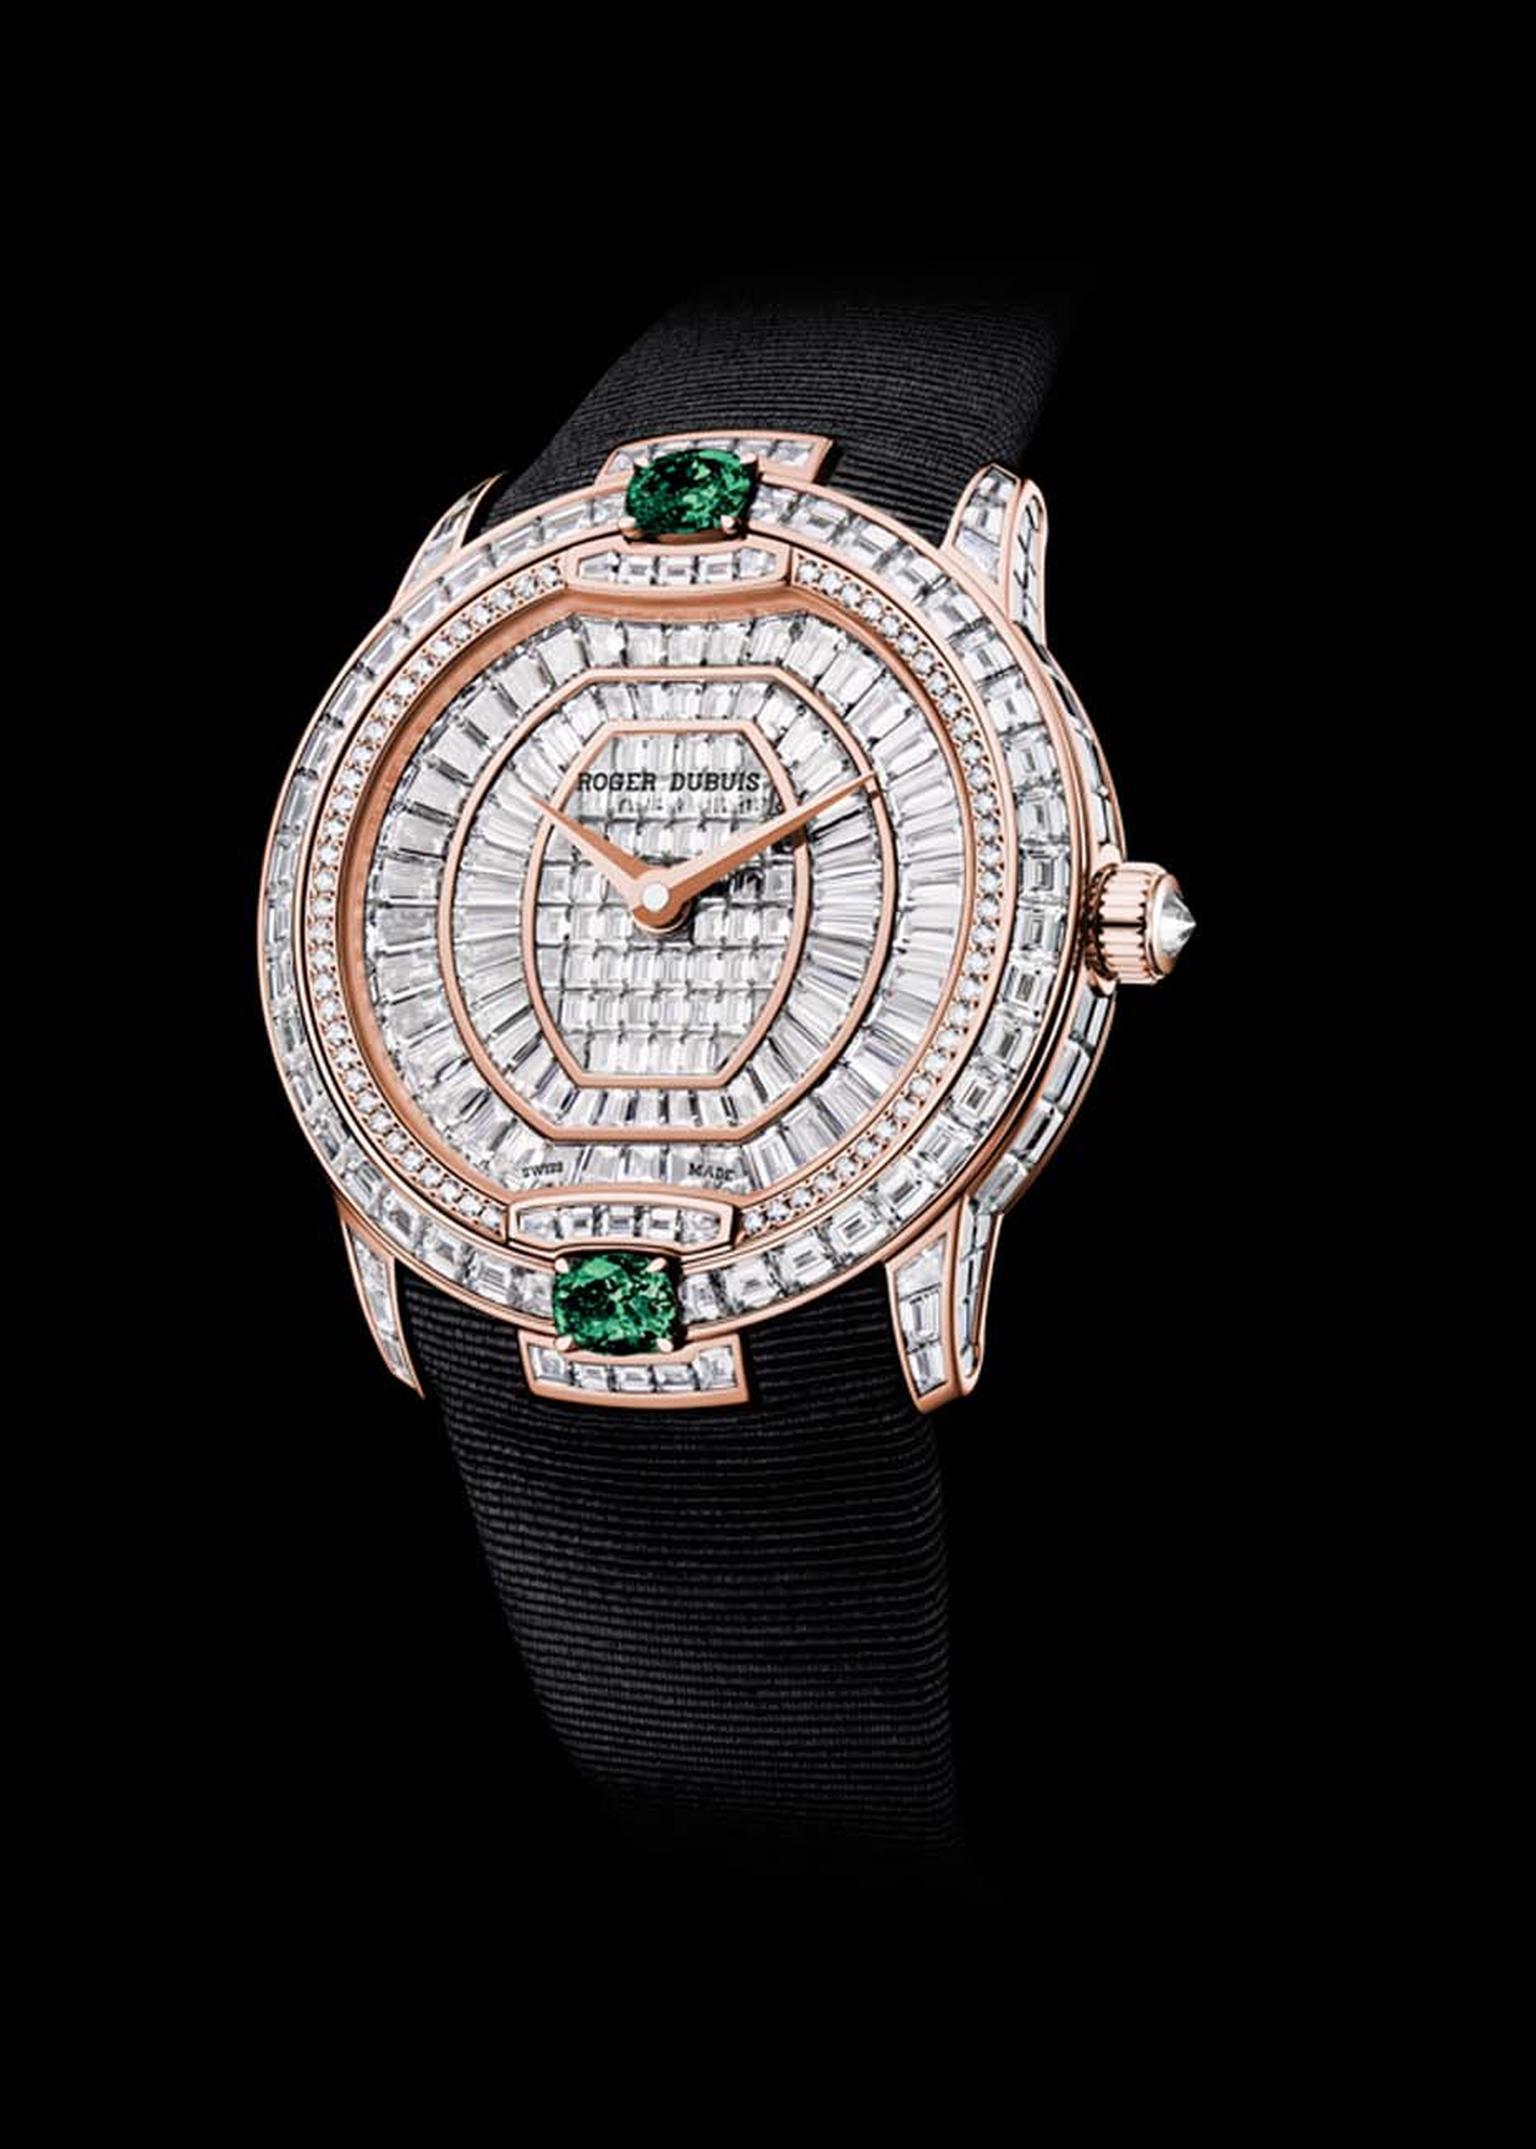 Roger Dubuis Velvet Haute Joaillerie watch in pink gold with 367 baguette and brilliant-cut diamonds and two striking emeralds.